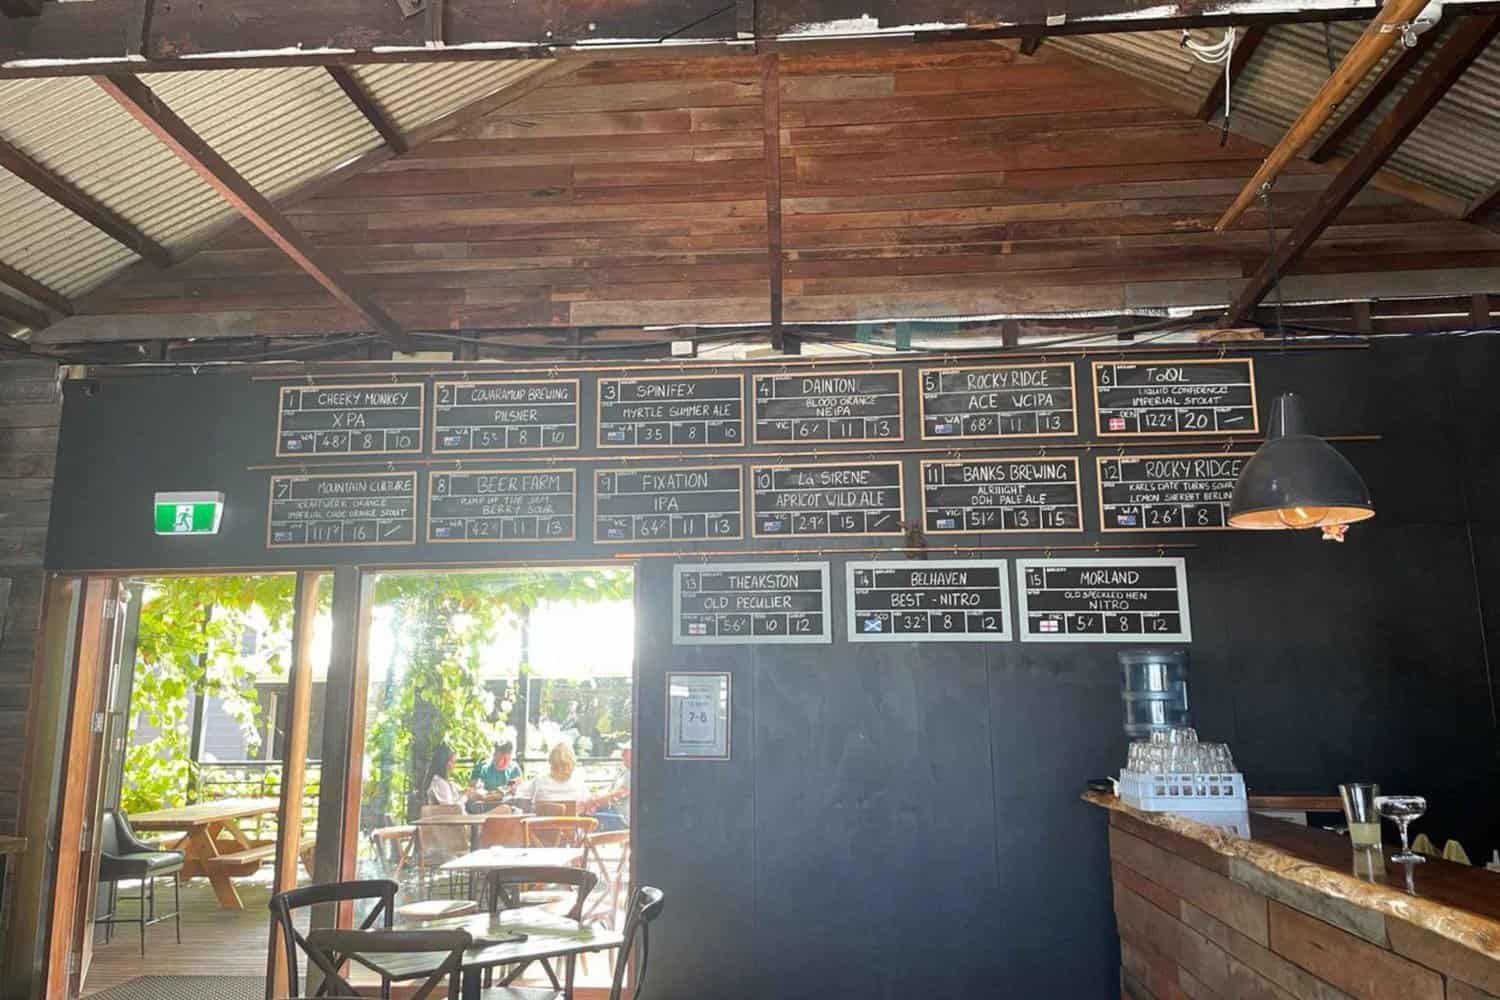 A price wall at the Tap House in Cowaramup showcasing all the different types of local beers on tap. The wall features a list of each beer's name, alcohol percentage, and price per pint. The labels and fonts are artistic and eye-catching, making it easy for customers to choose their favorite brew.